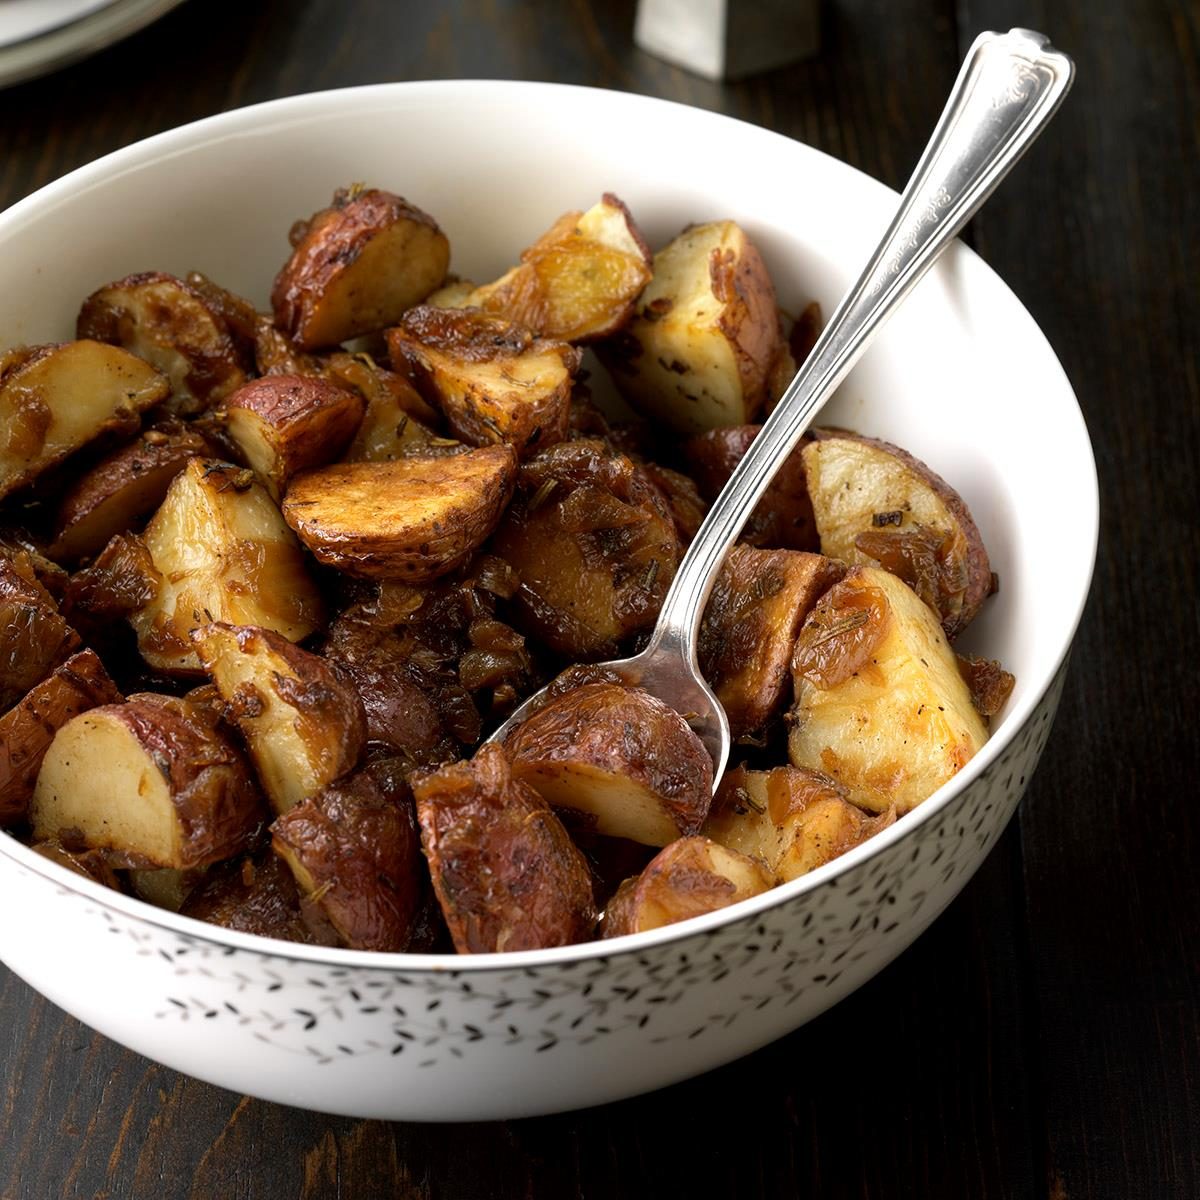 Vegan Rosemary Potatoes with Caramelized Onions